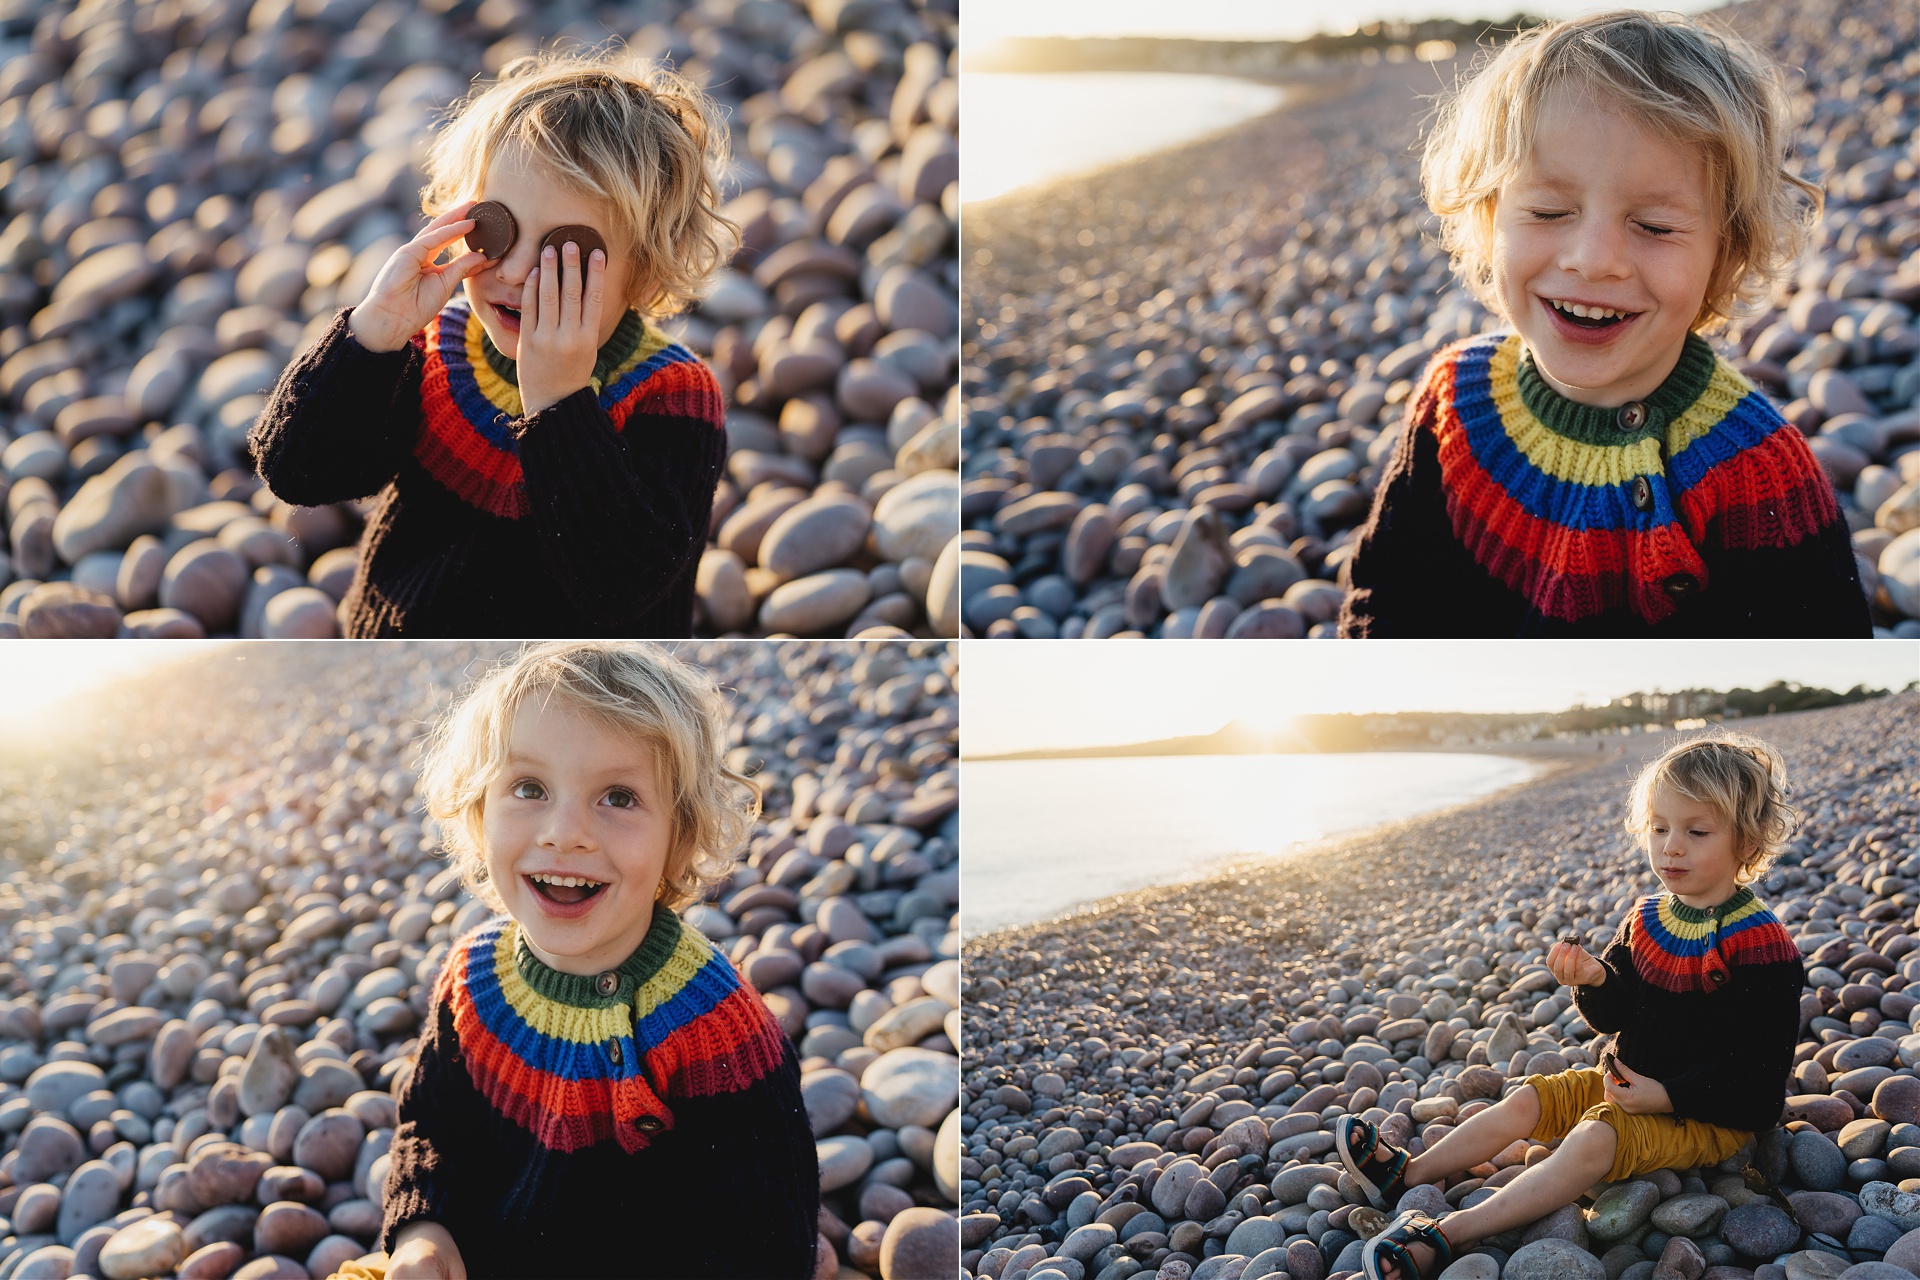 A small boy sitting on a beach and laughing